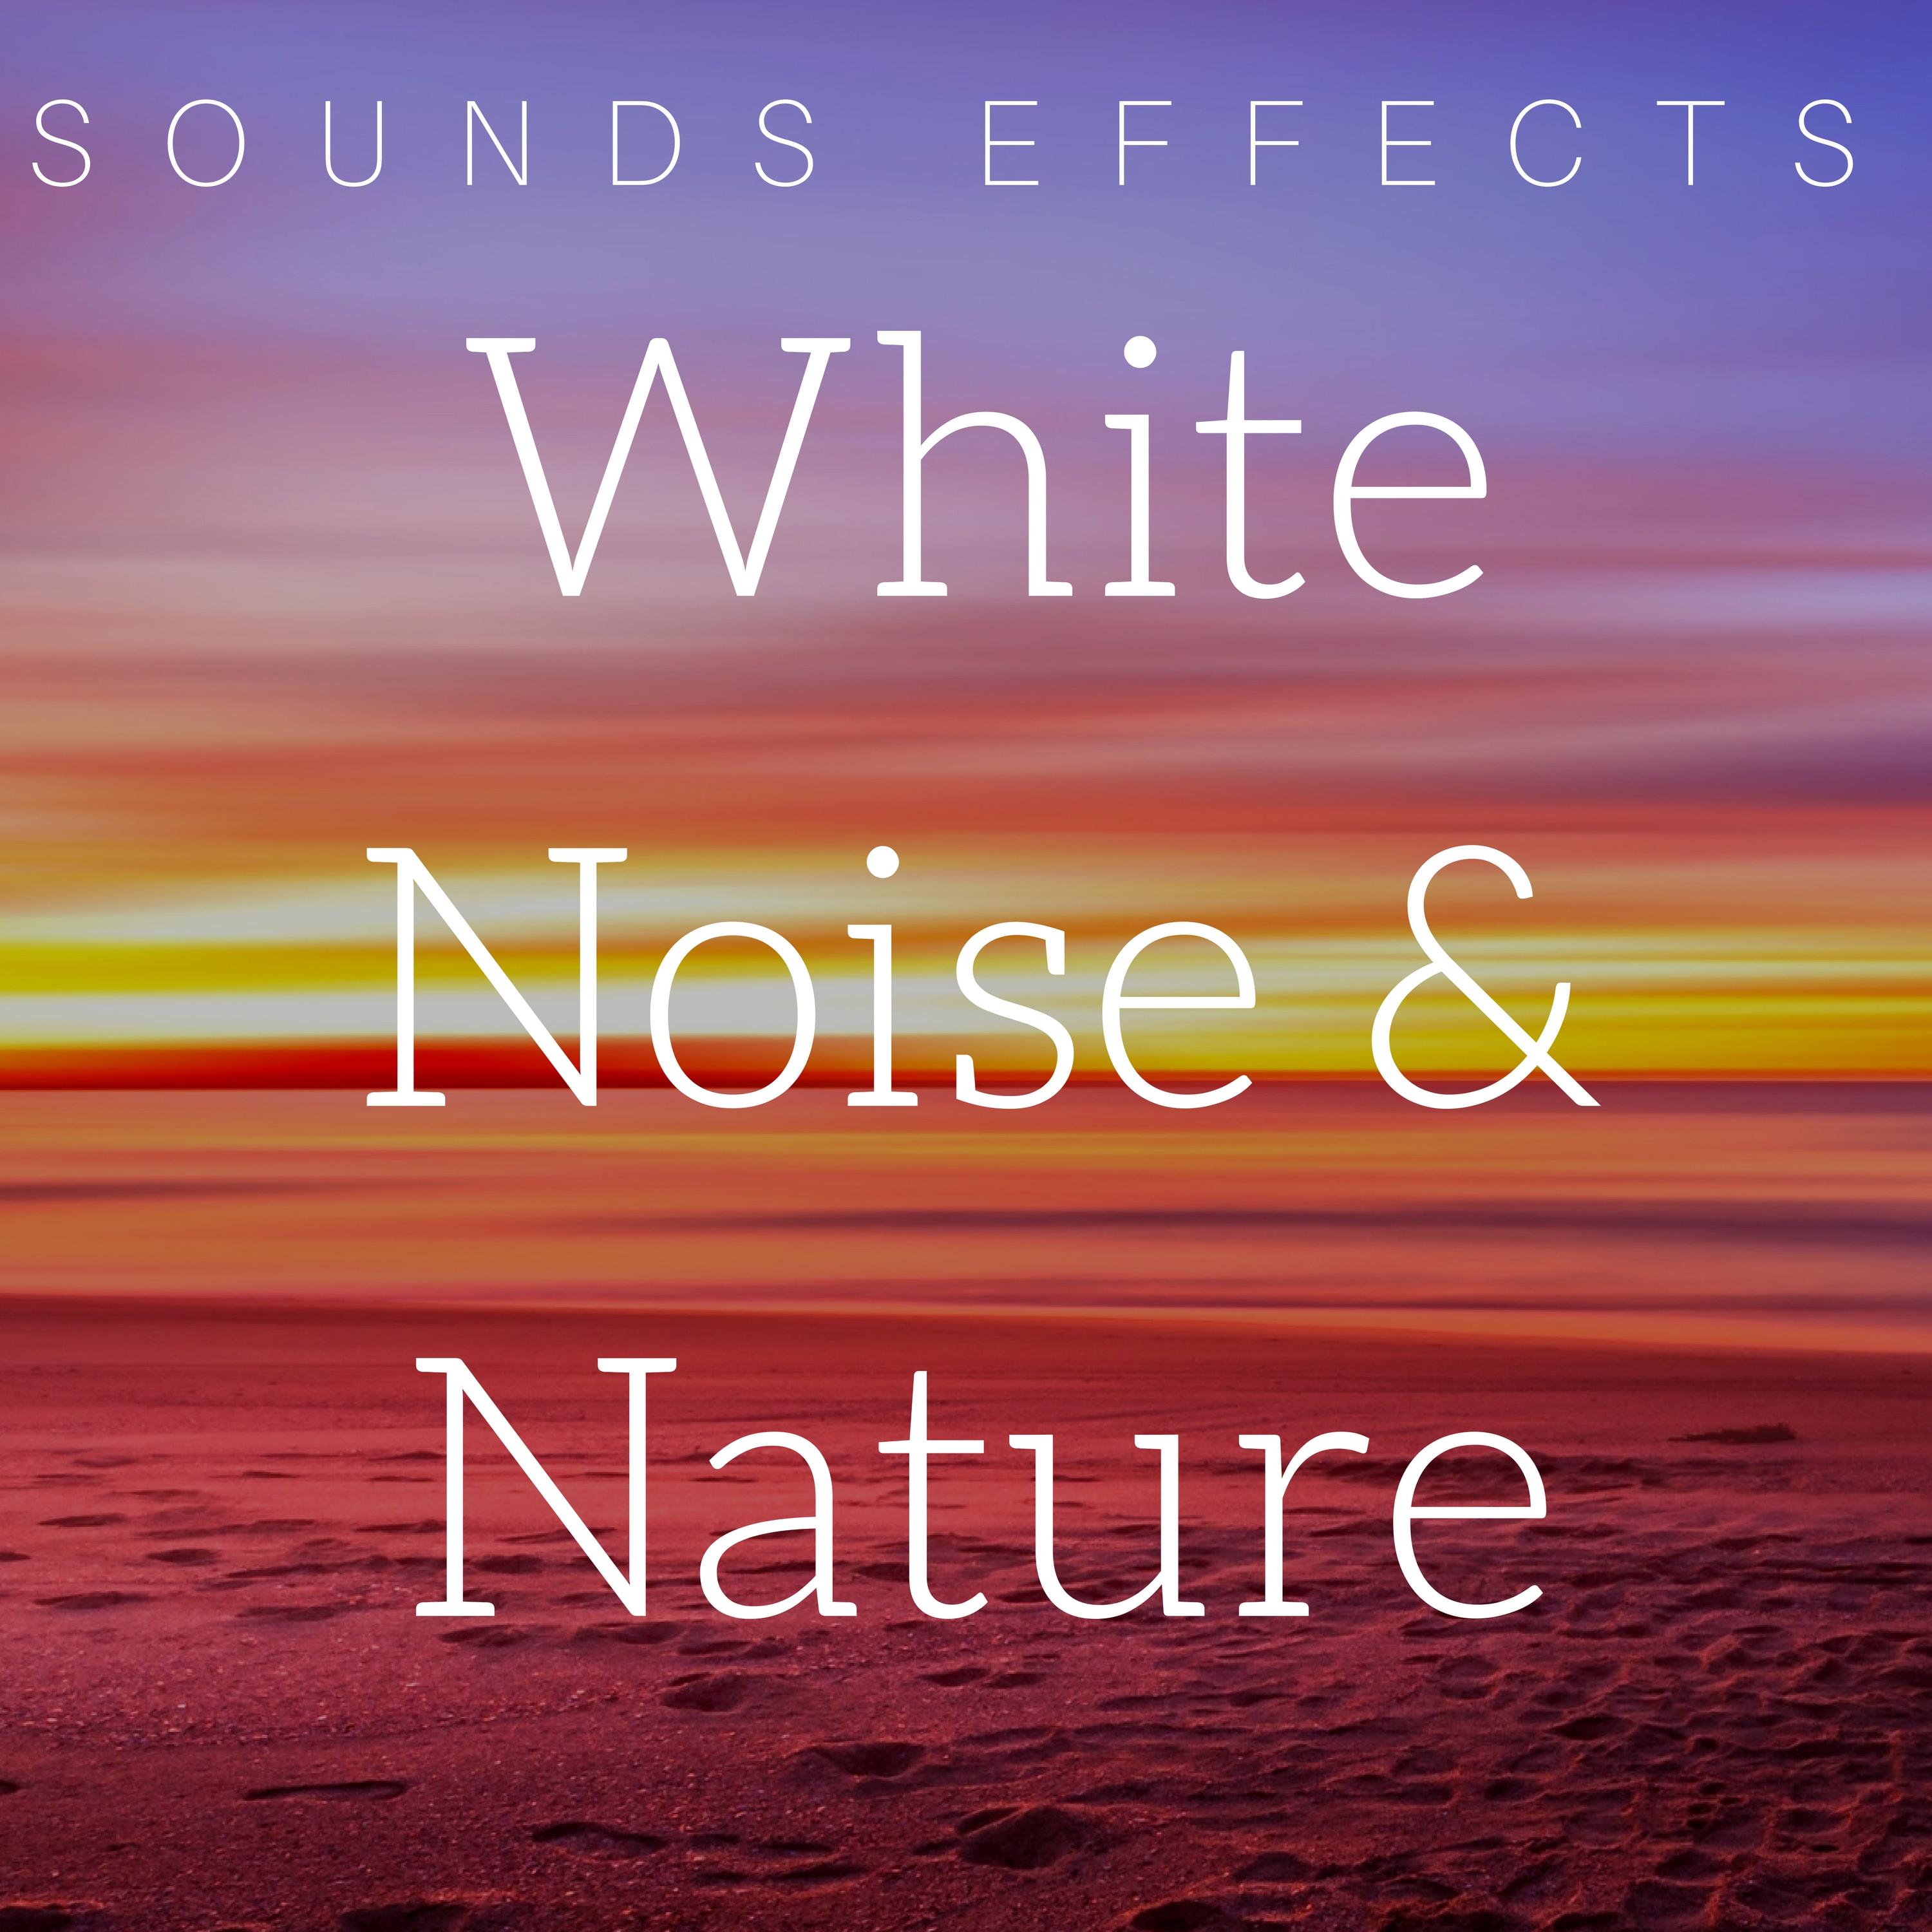 White Noise & Nature - Sounds Effects